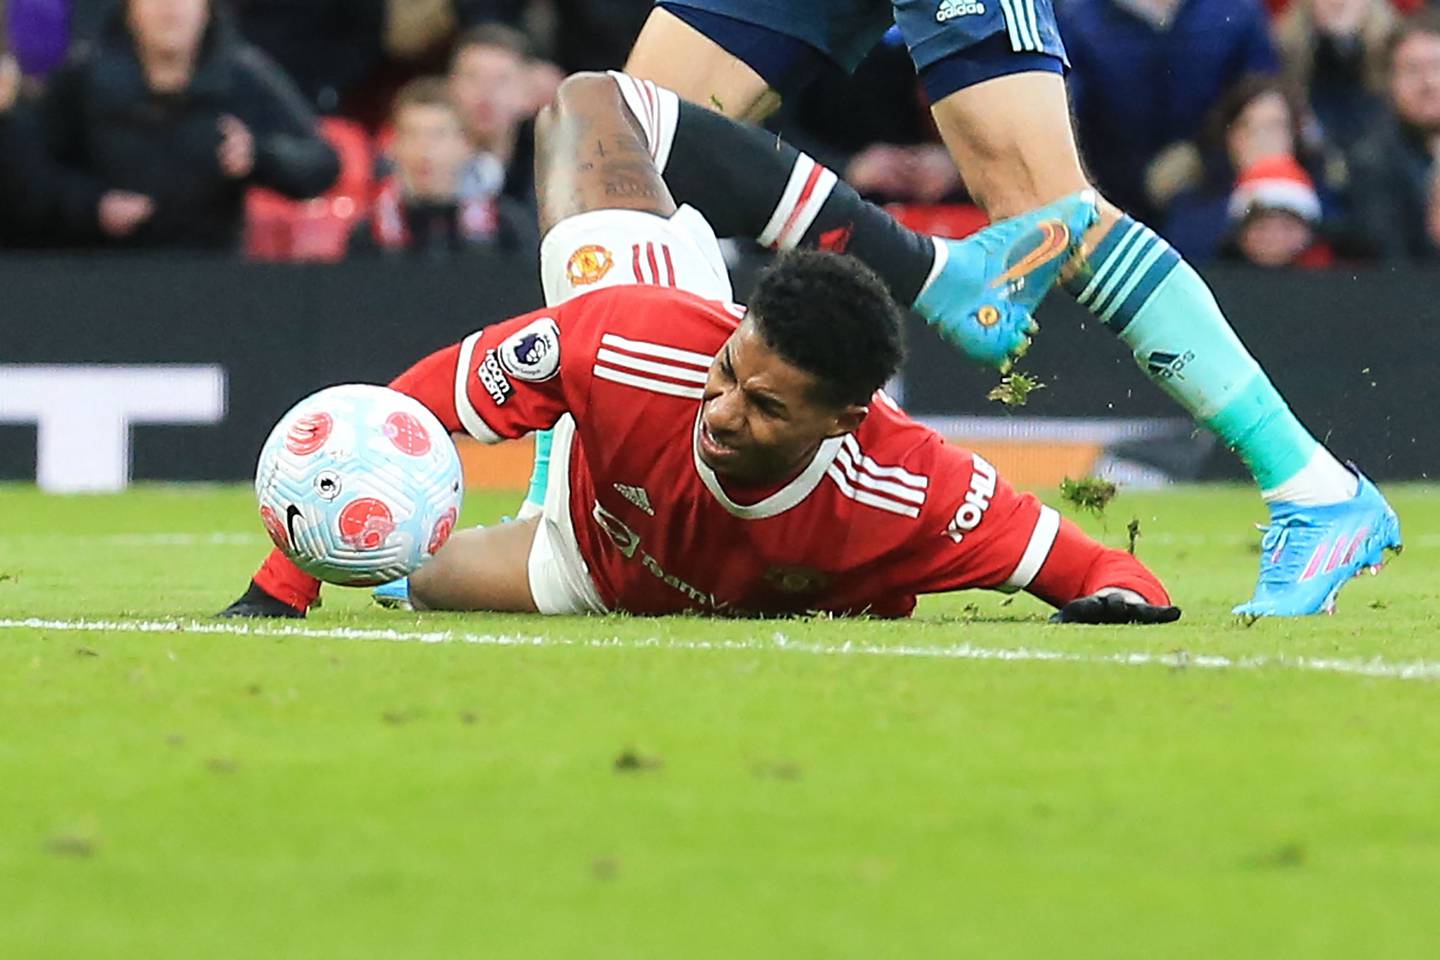 Marcus Rashford reacts after being tackled. AFP